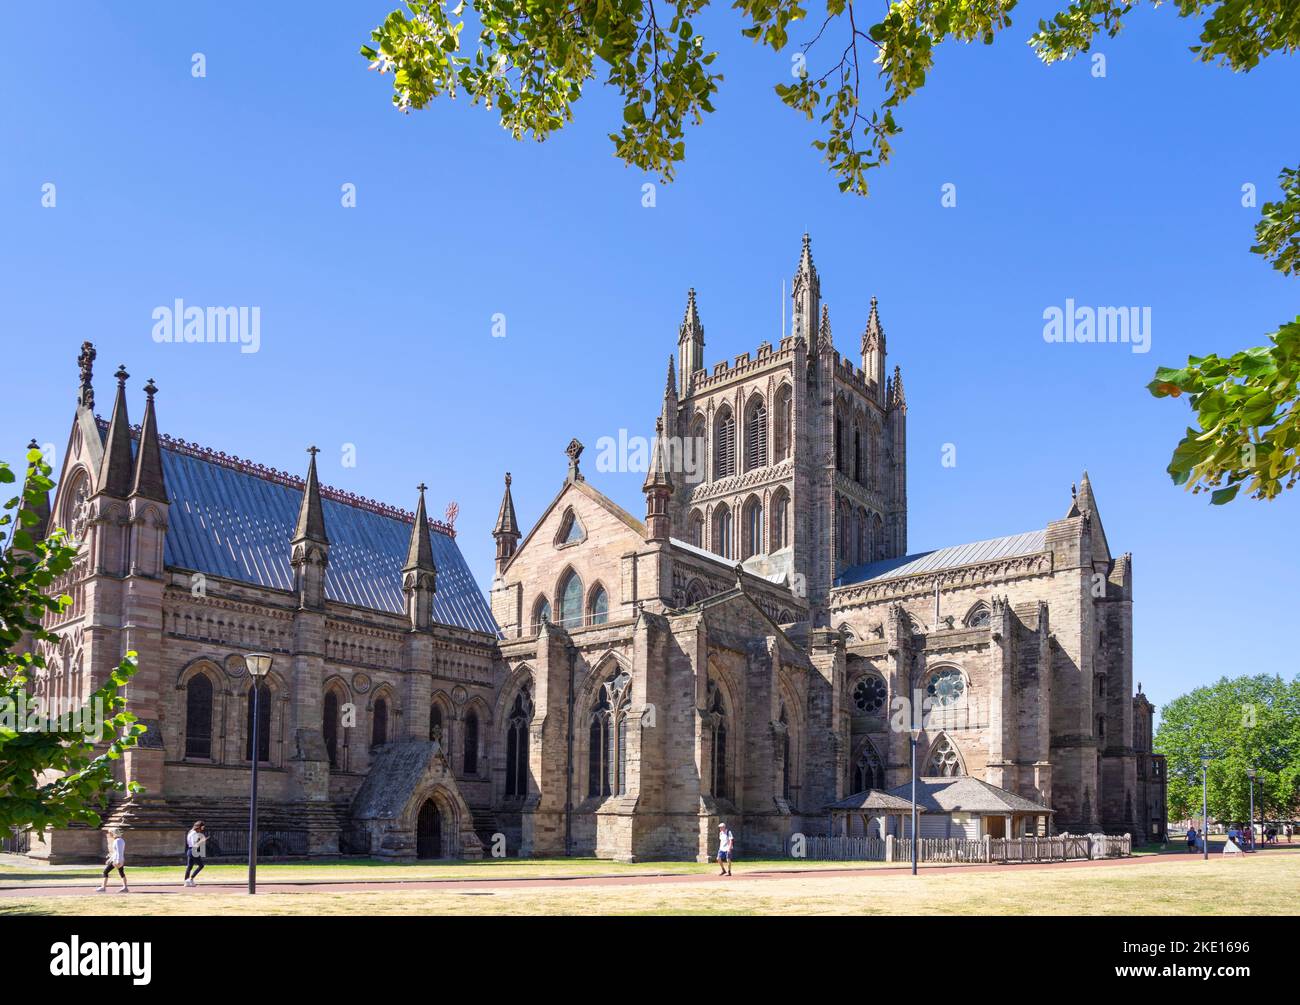 Hereford Cathedral Hereford Cathedral of Saint Mary the Virgin and Saint Ethelbert the King Hereford Herefordshire England UK GB Europe Stock Photo